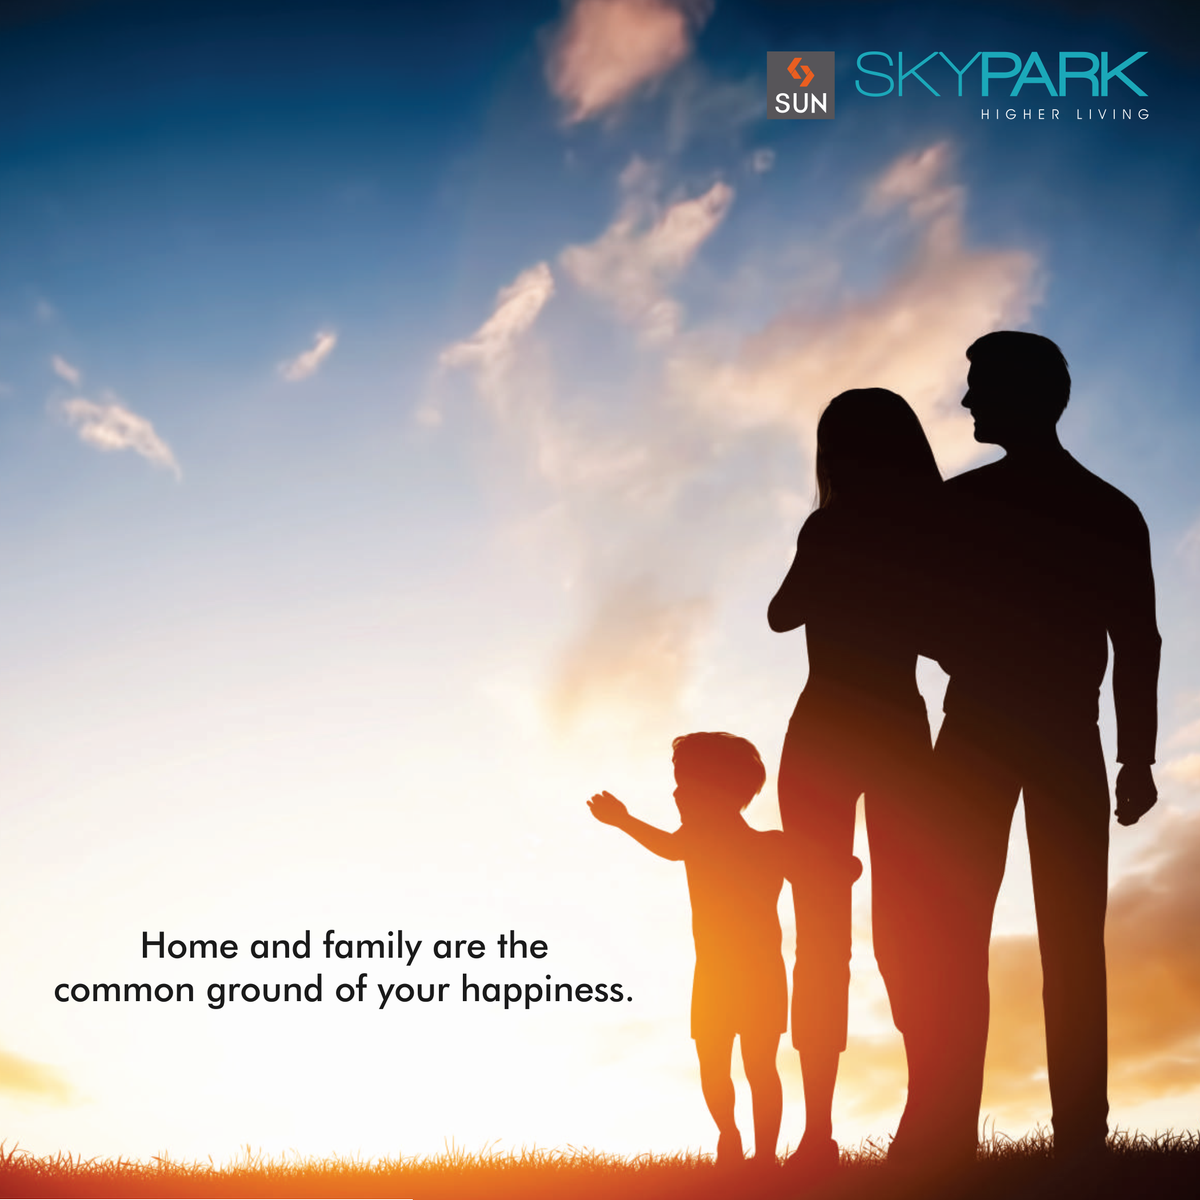 #Happiness is when beautiful memories are well-enjoyed with your #family and at your home. https://t.co/j5dkaPkbr6